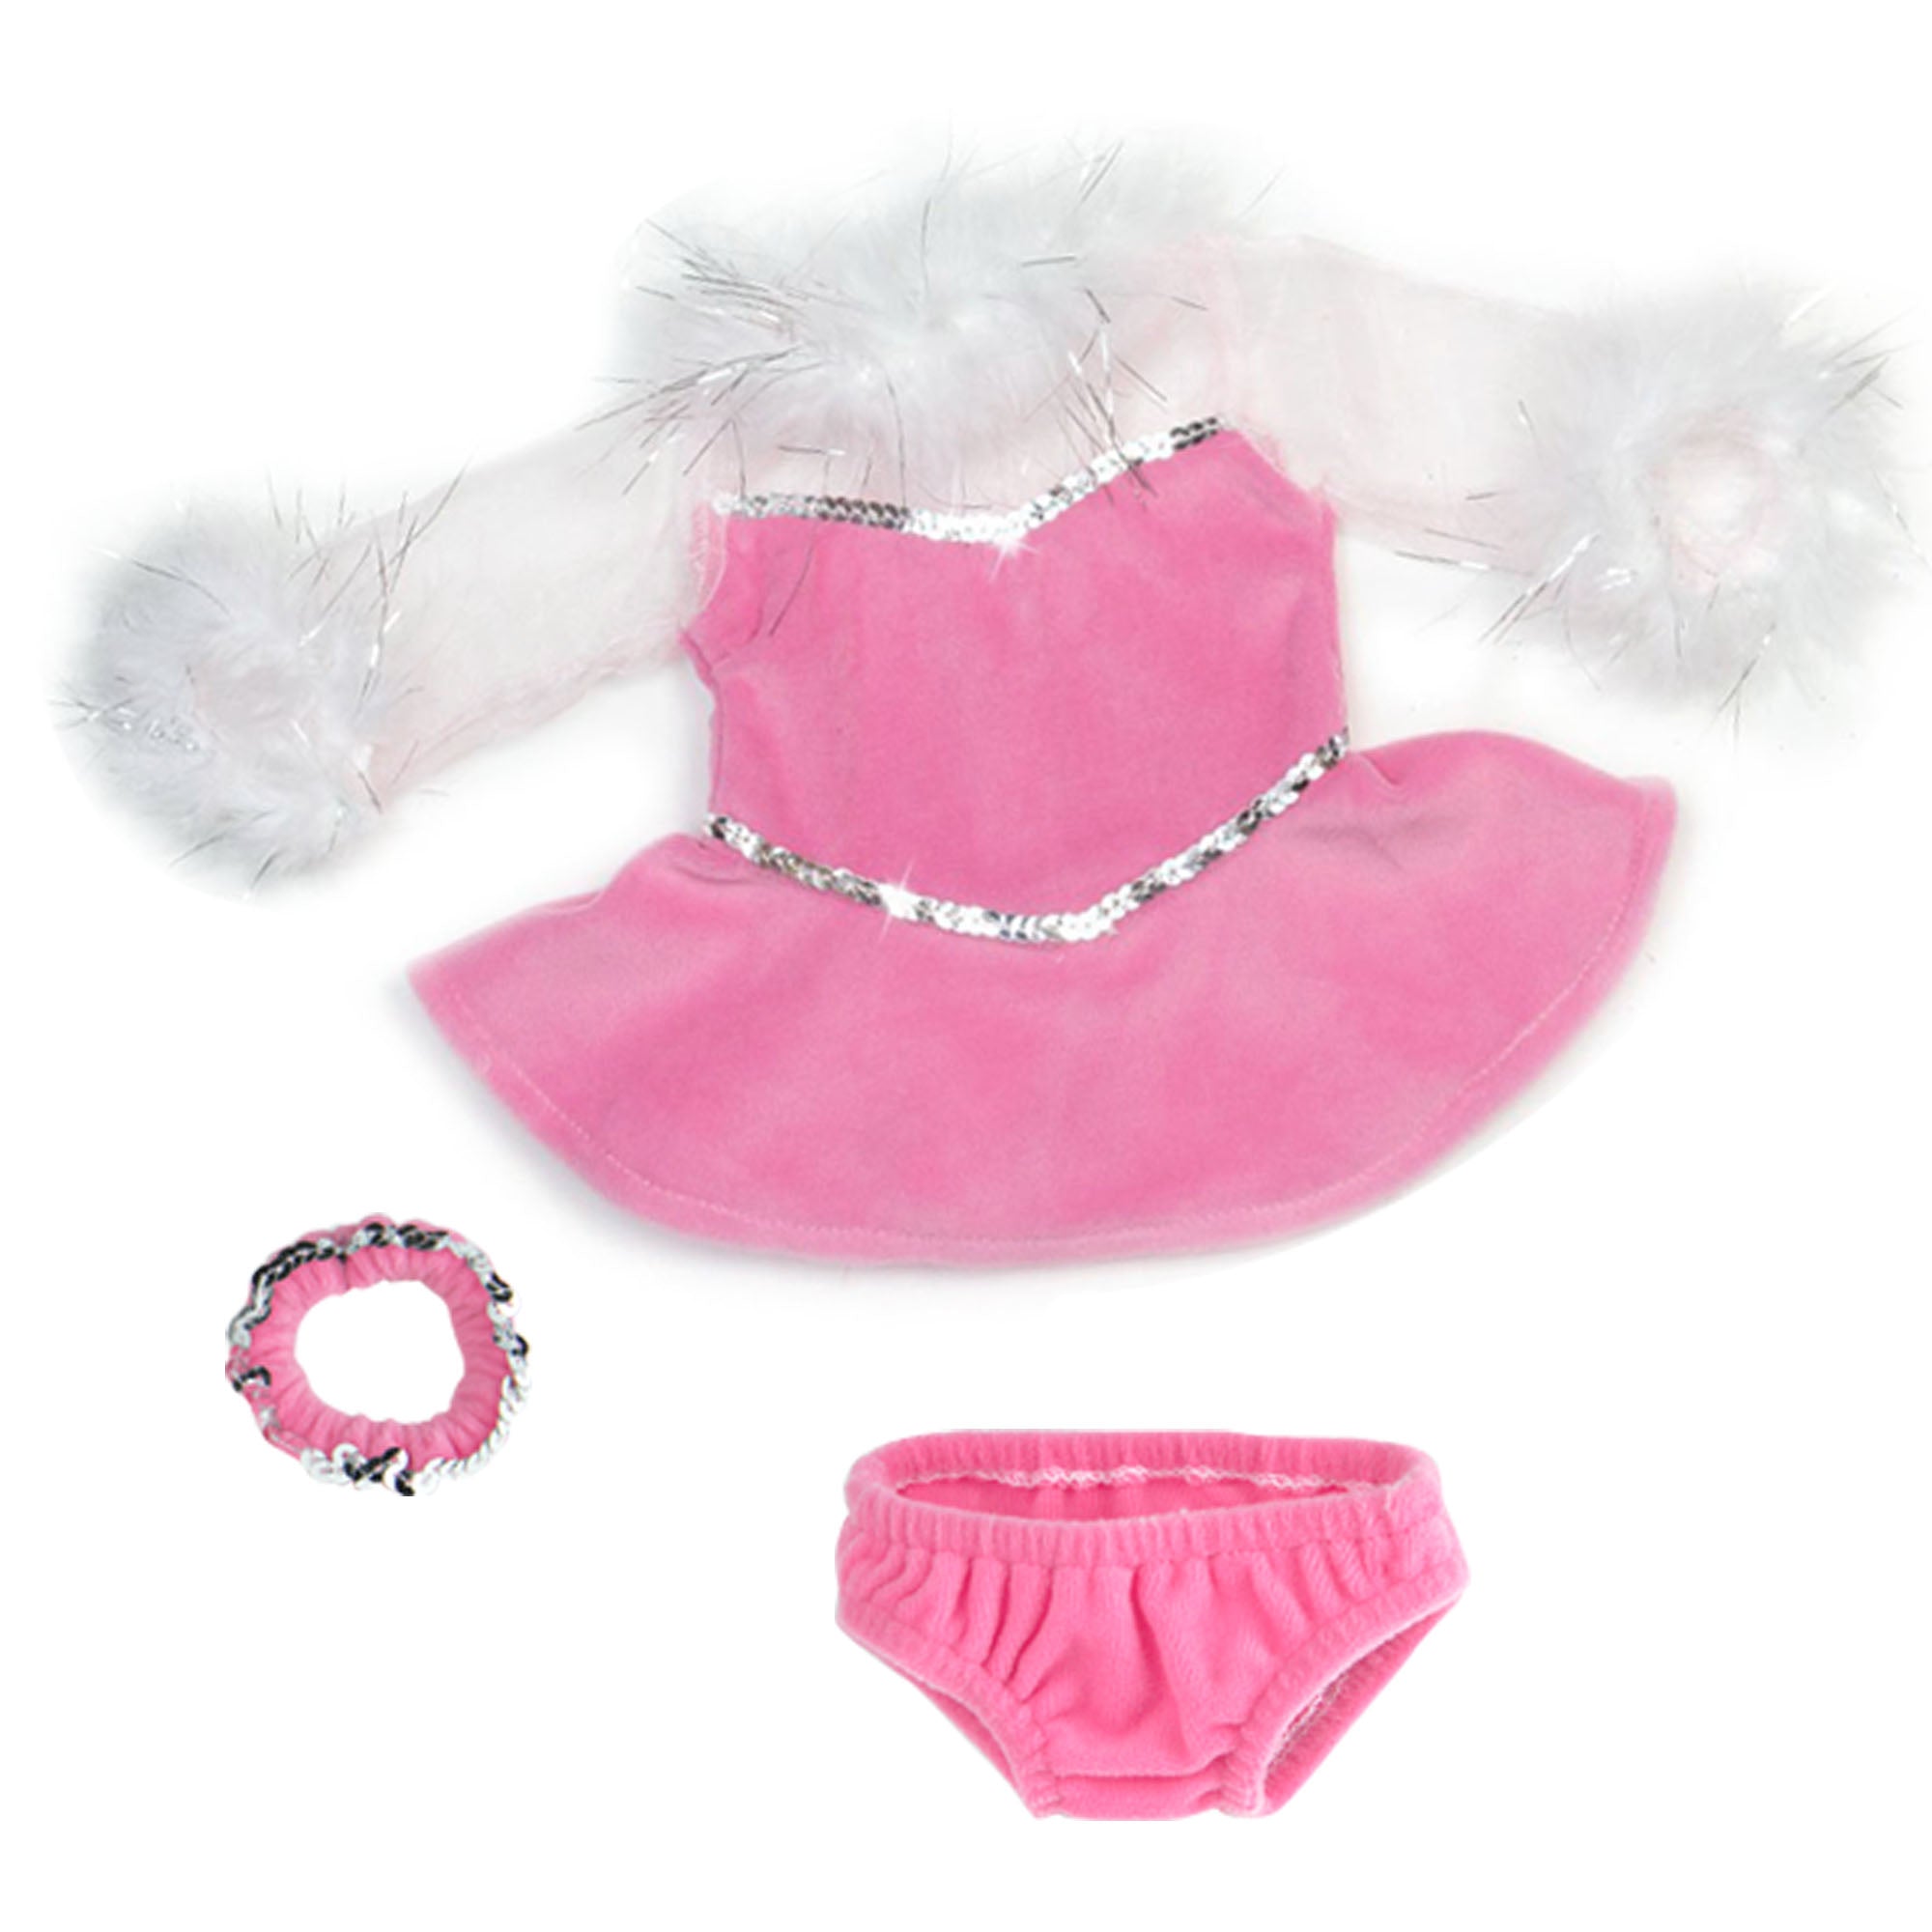 Sophia’s Complete Three-Piece Ice Skating Costume Set Including Gown with Mesh Sleeves & Silver Sequins, Panties, & Scrunchy Ponytail Holder for 18” Dolls, Pink